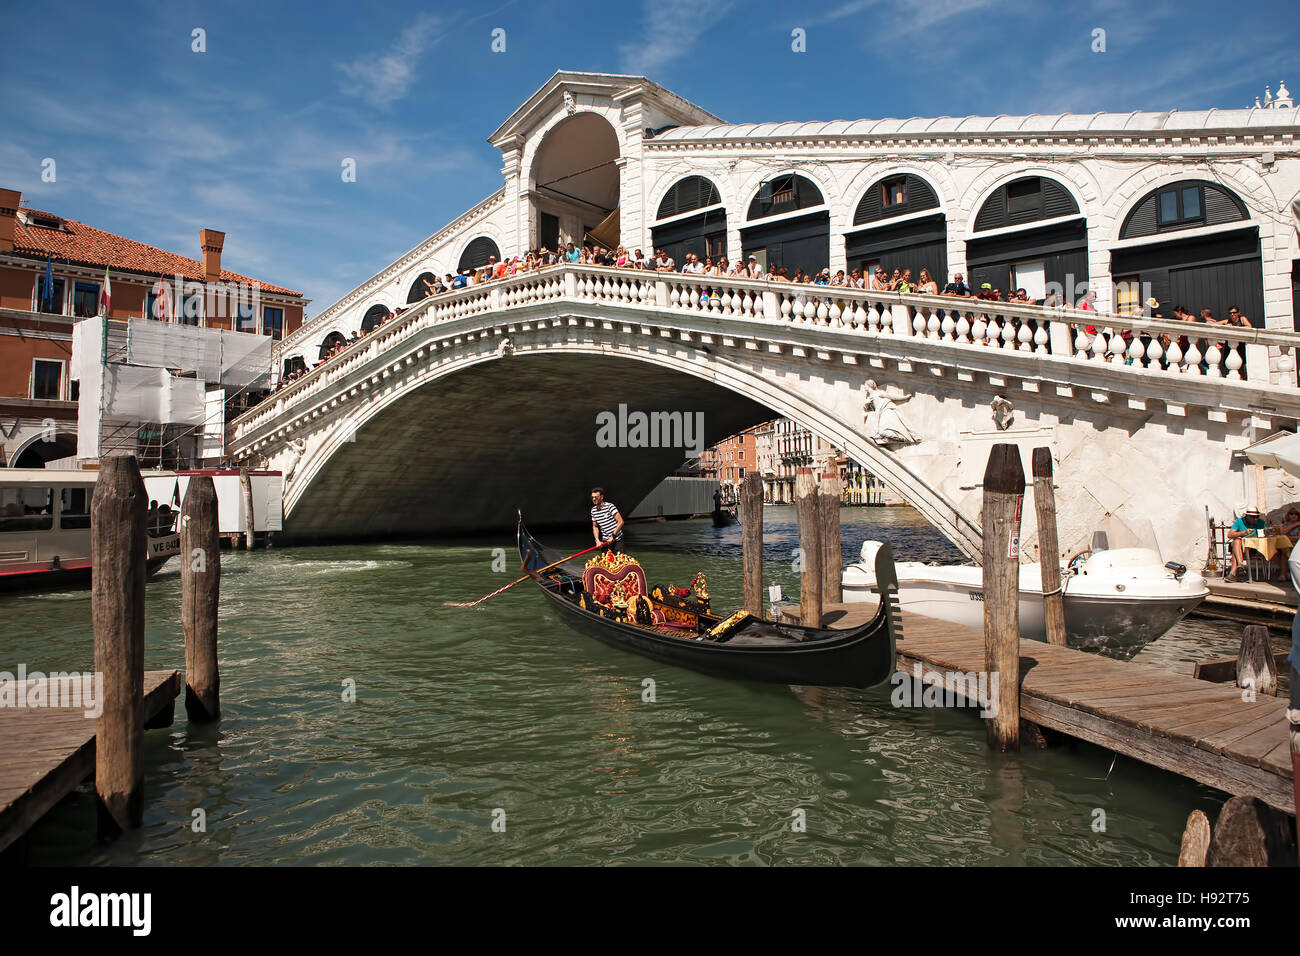 Crowds of people on the popular  Rialto Bridge watching tourists in a gondola by a wooden jetty, , Venice, Italy. Stock Photo